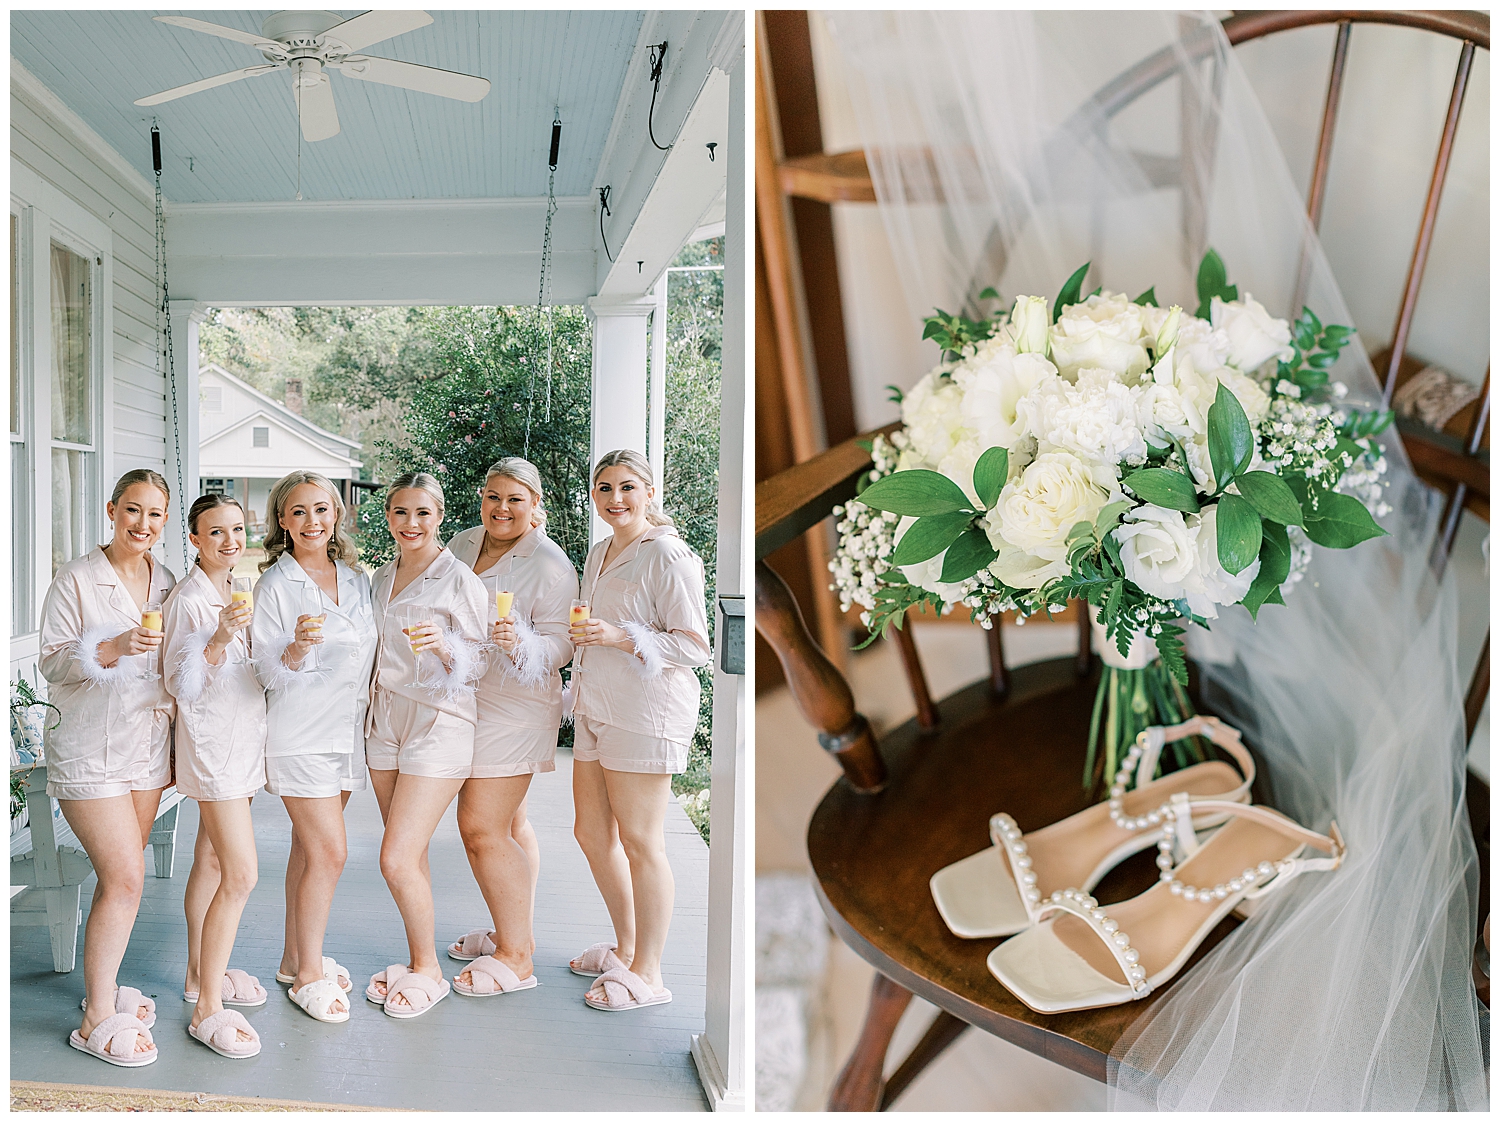 A bride smiles with the bridesmaids on the porch featured in Signature Magazine.